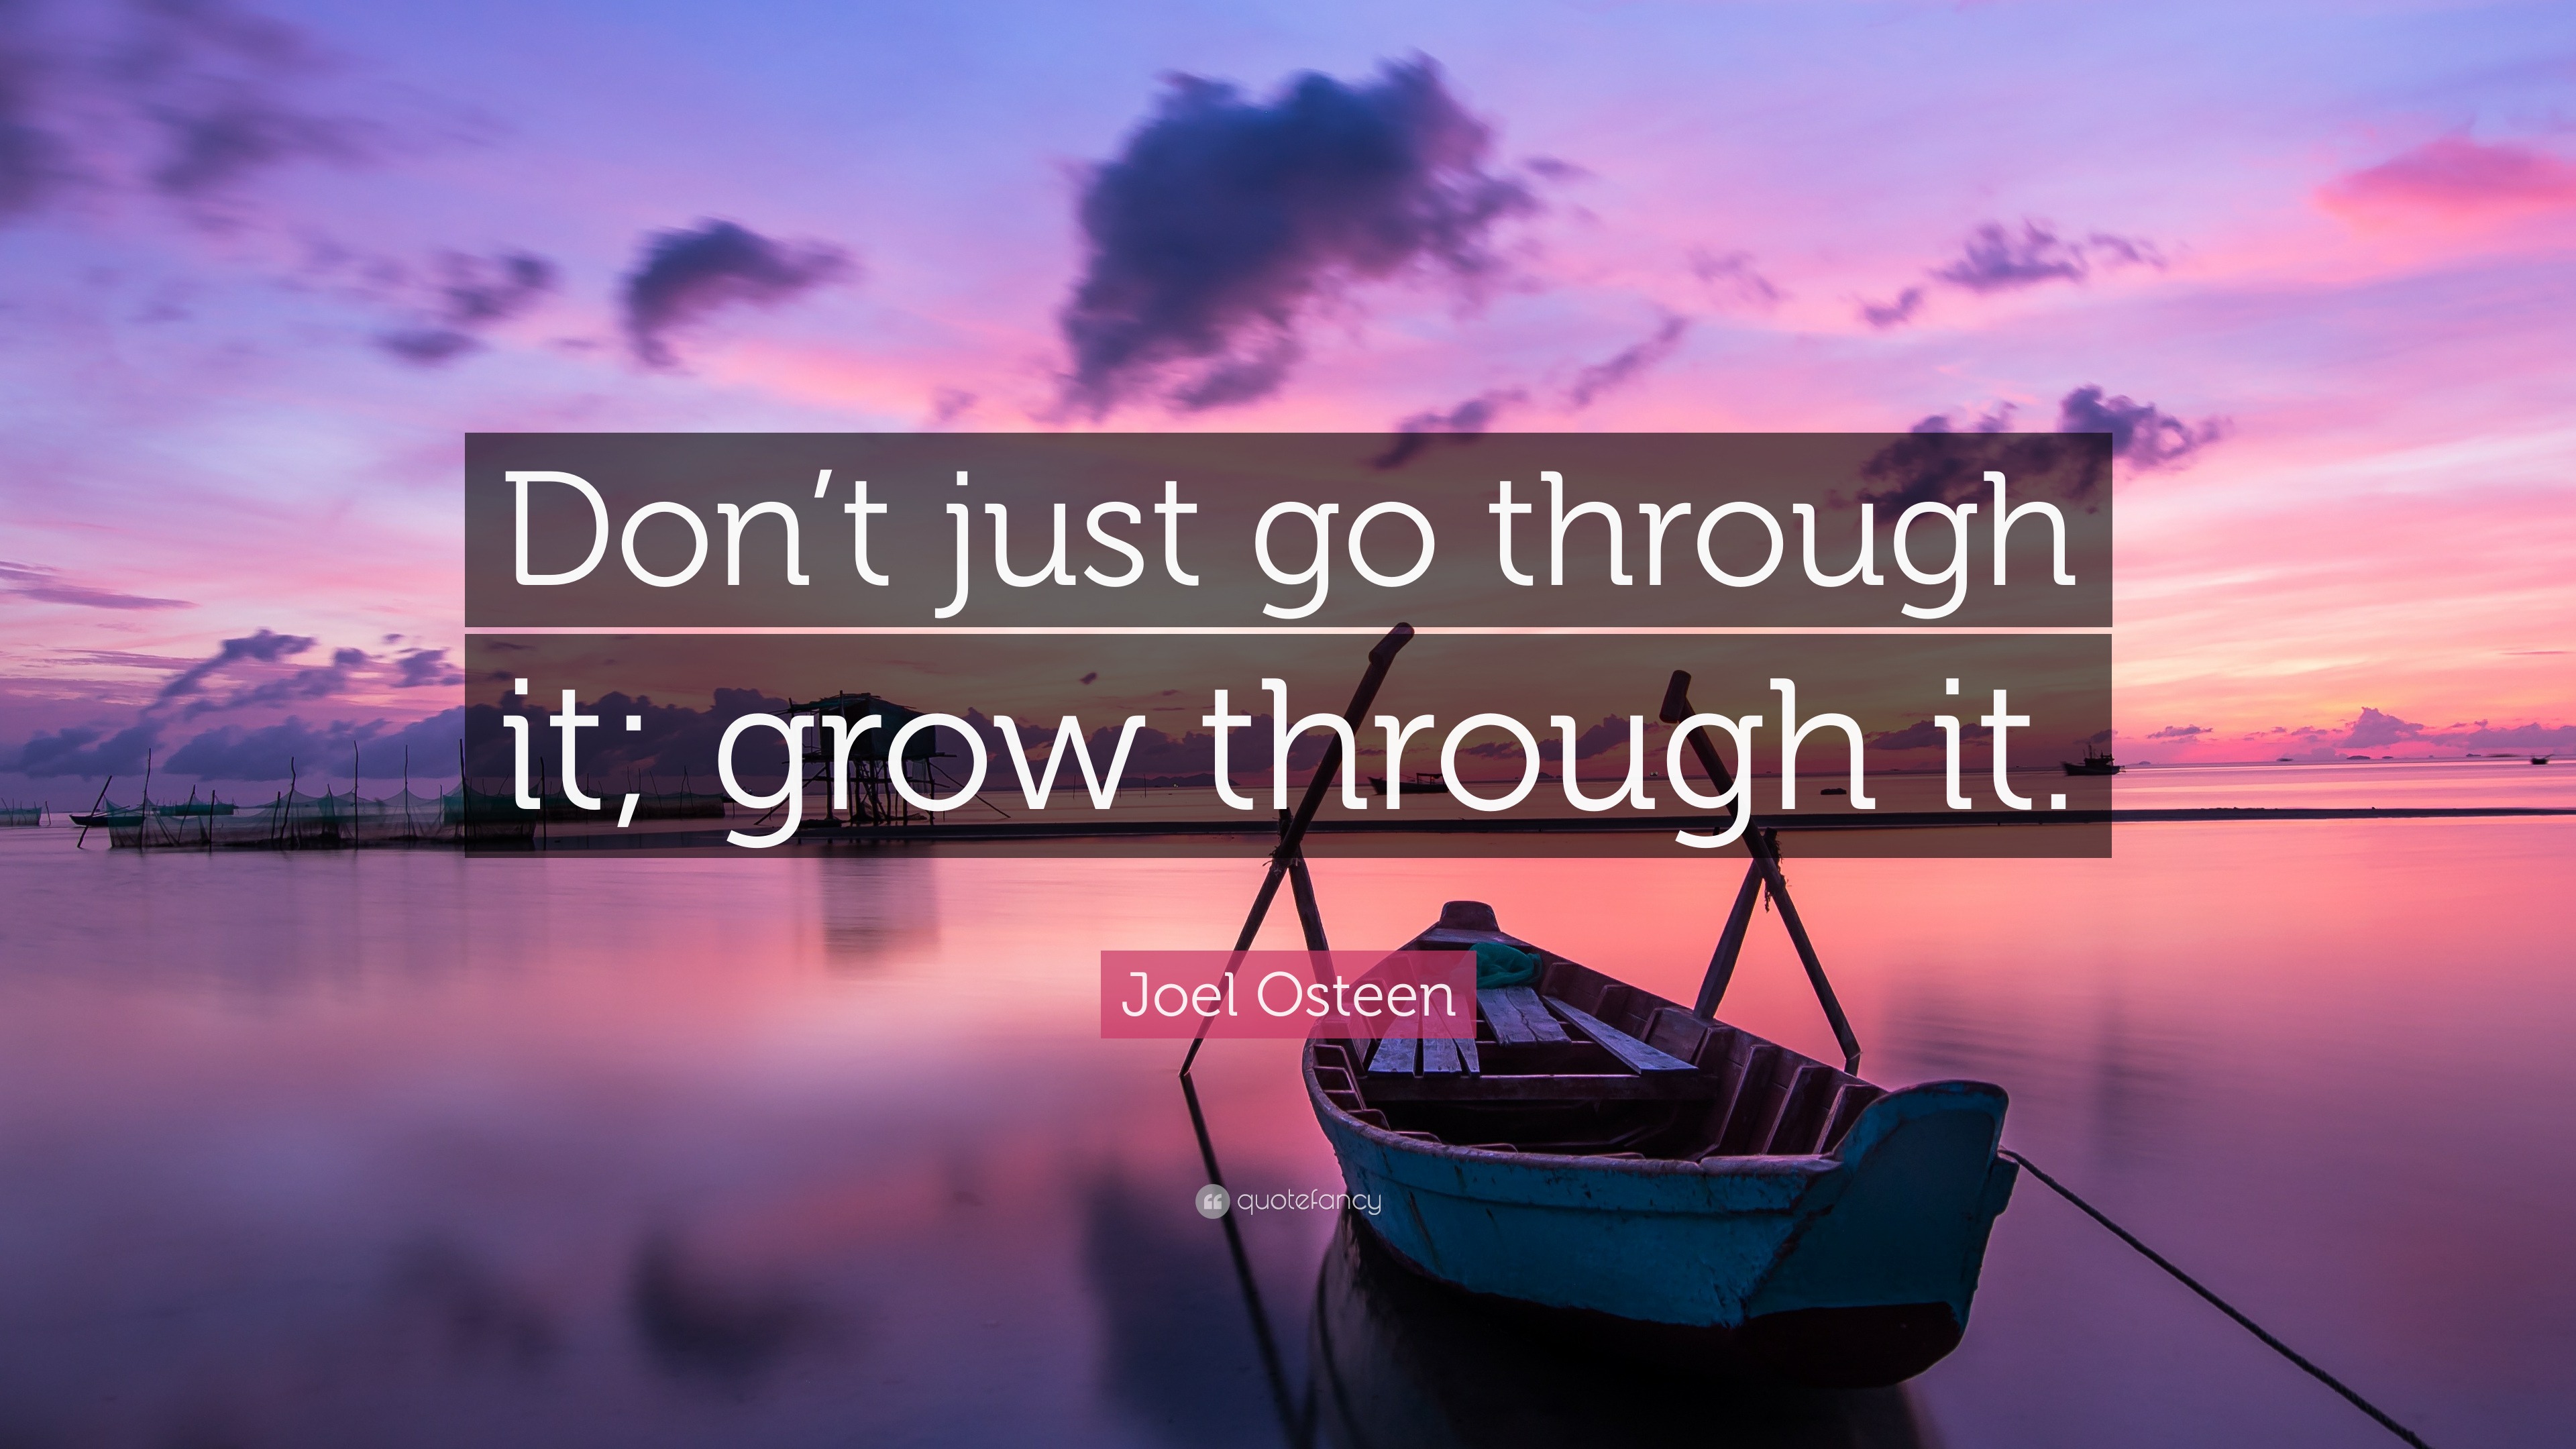 Joel Osteen Quote: “Don’t just go through it; grow through it.”